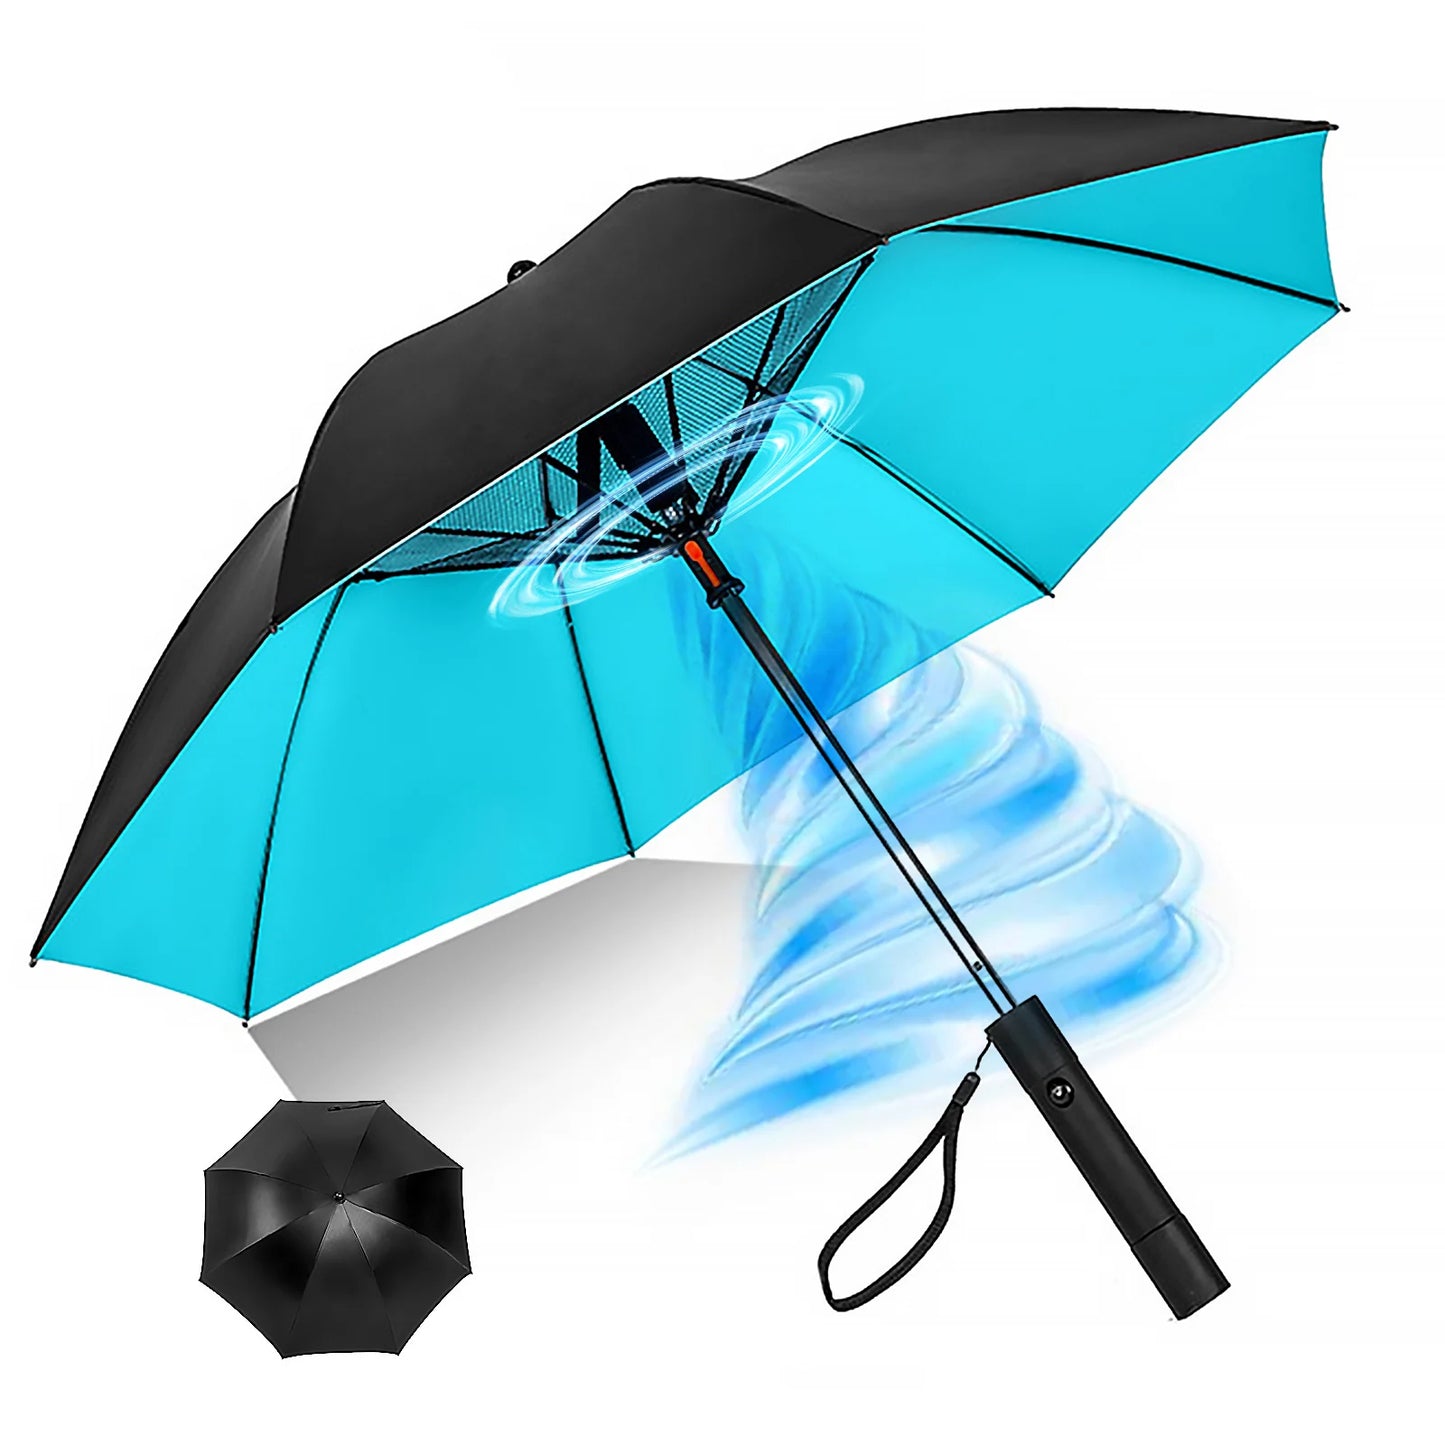 Portable Umbrella with Fan: Sleek black umbrella with vibrant turquoise canopy, USB rechargeable fan for cooling, and safety isolation mesh for UV protection.